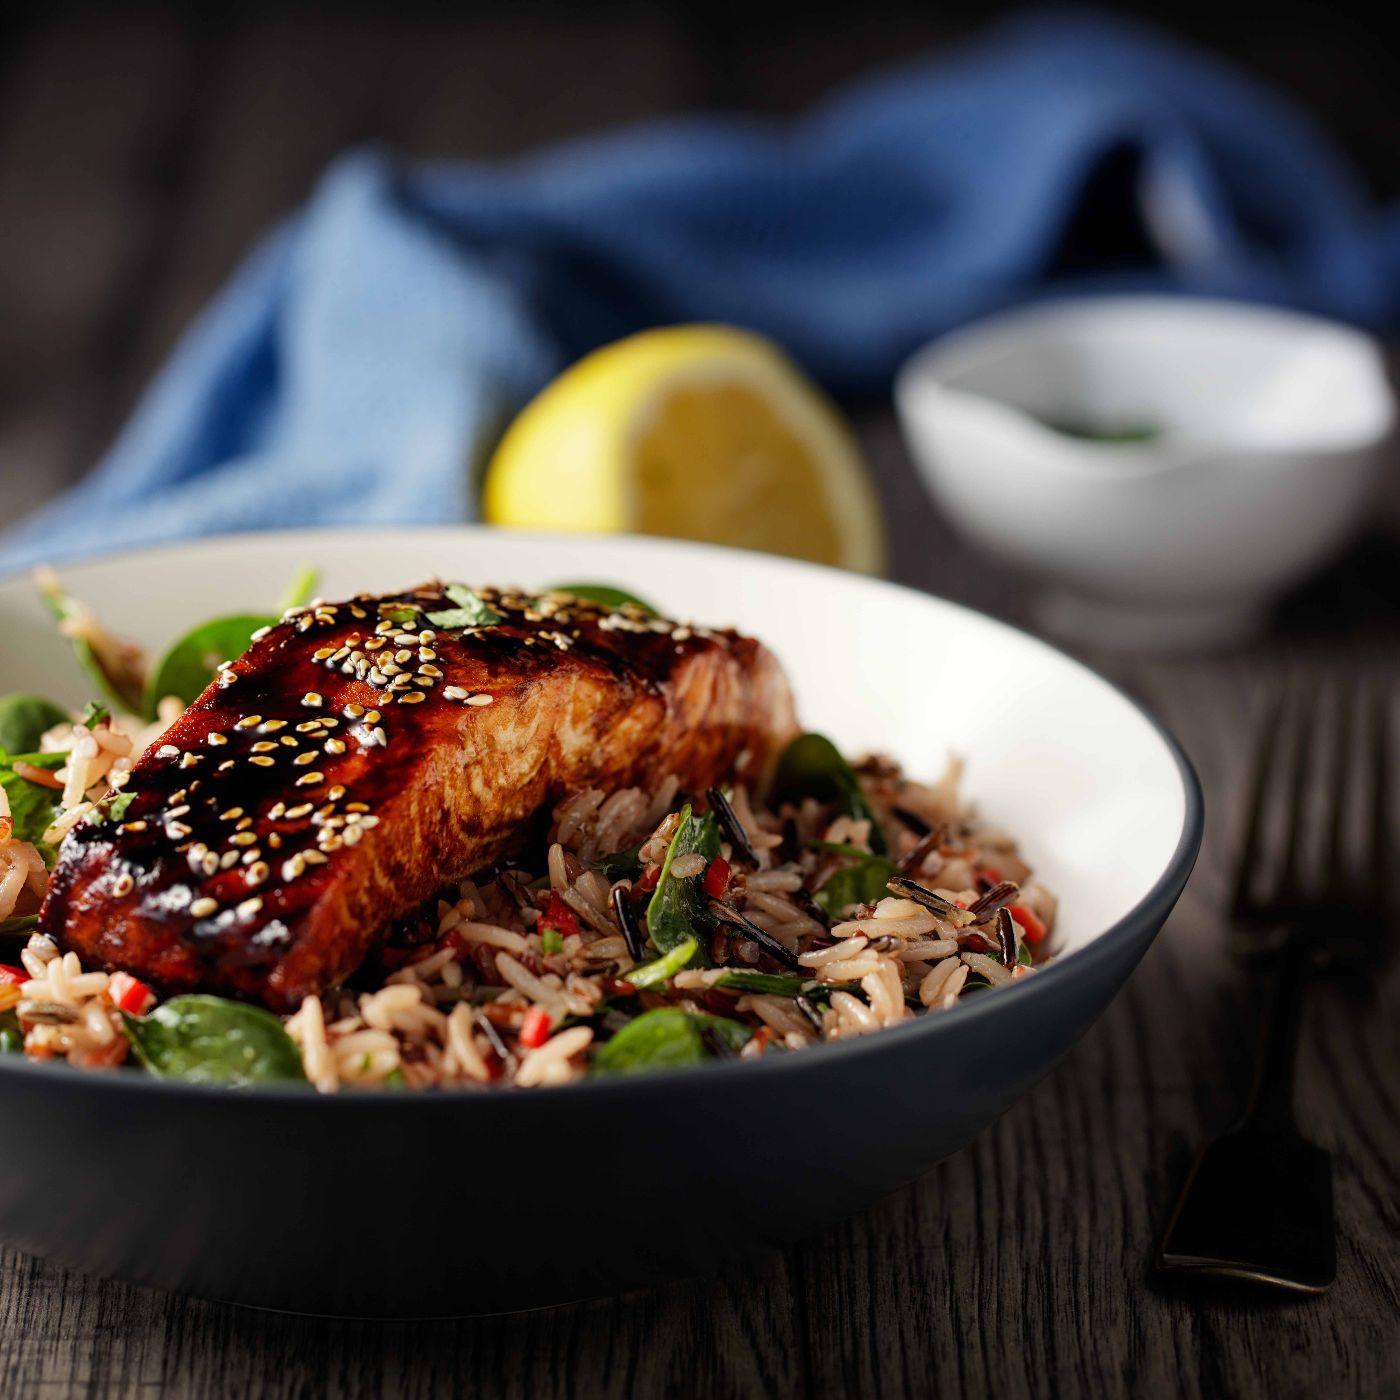 Healthy-wild-rice-salad-with-grilled-teriyaki--salmon-fillet-950469676_8660x5773 square.jpg